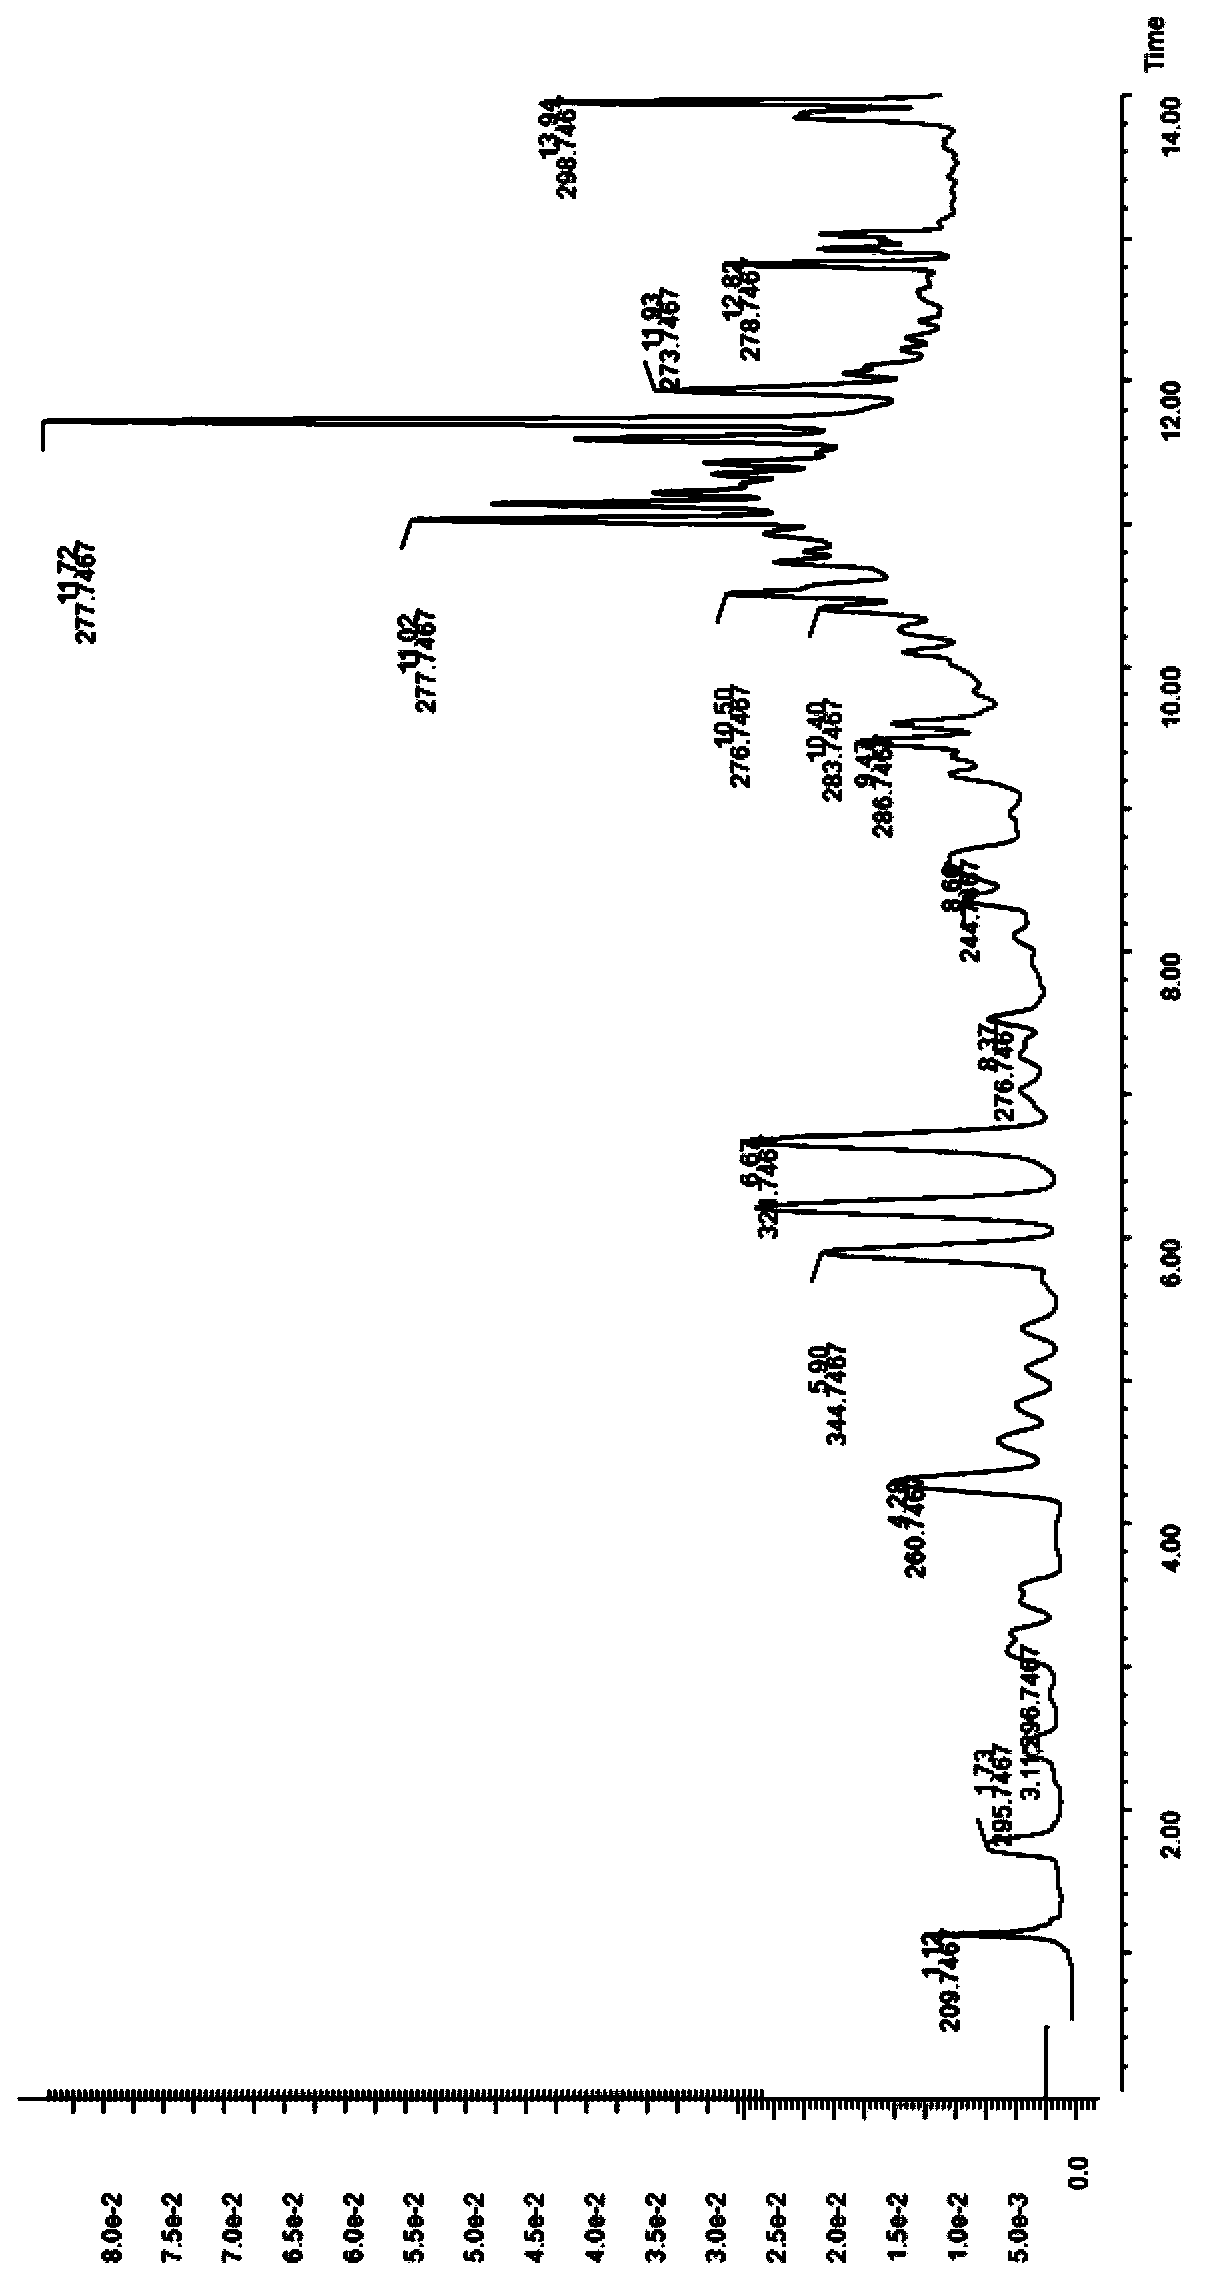 Detection method for ethyl acetate extract of paederia scandens